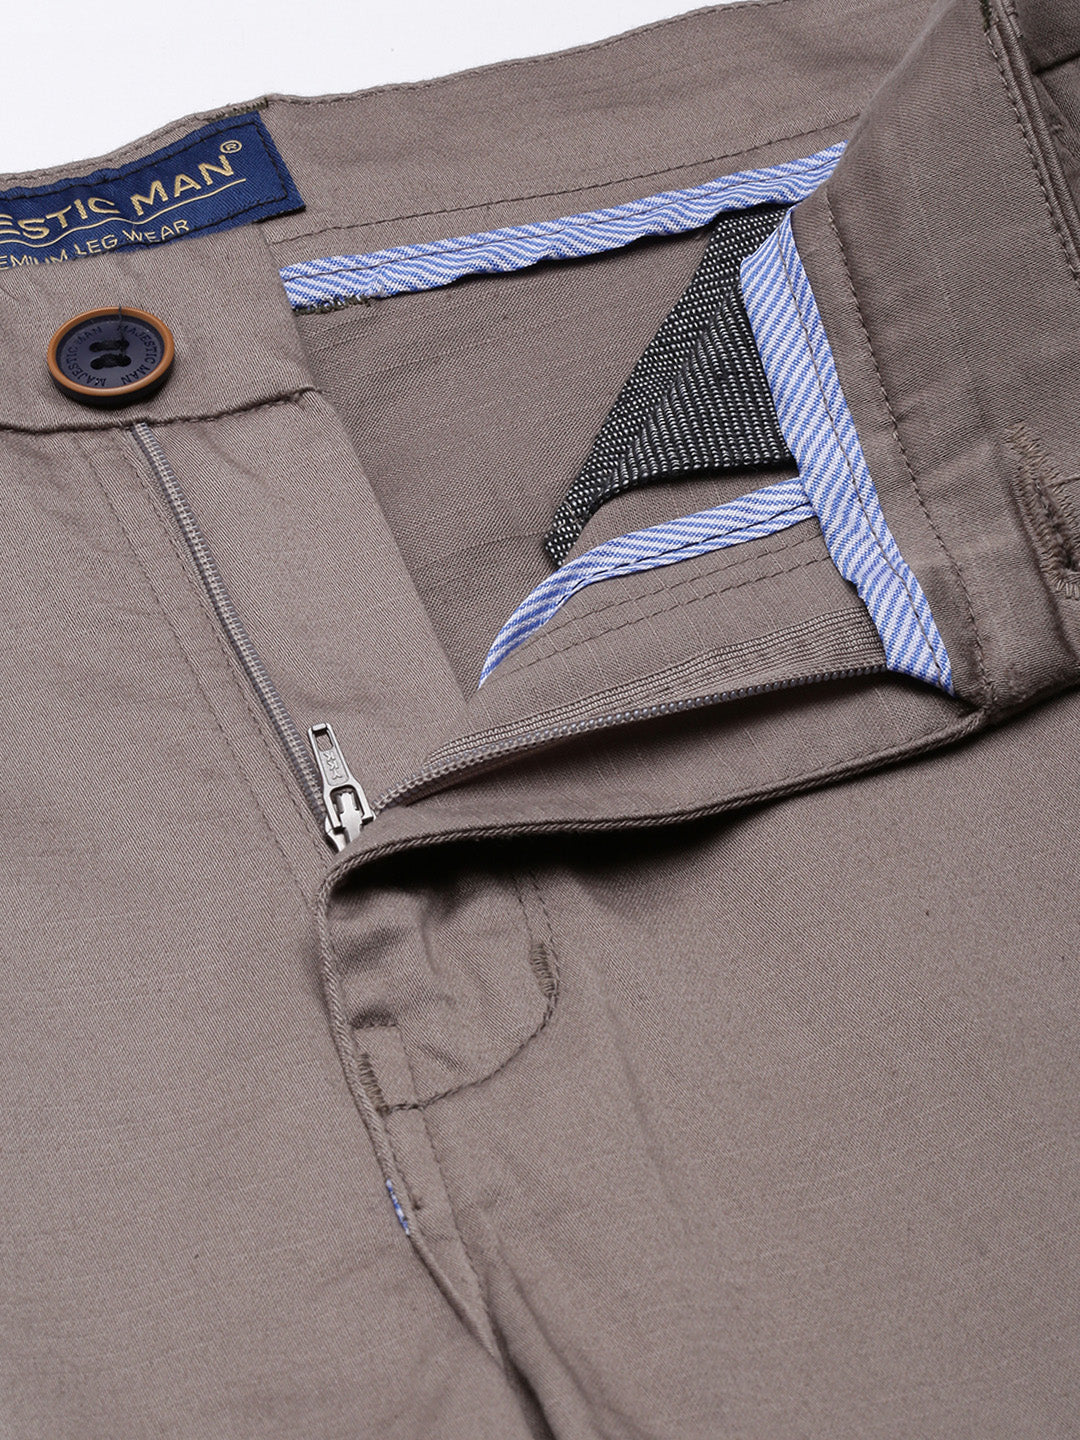 Classic Men's Trousers for Effortless Style - Taupe